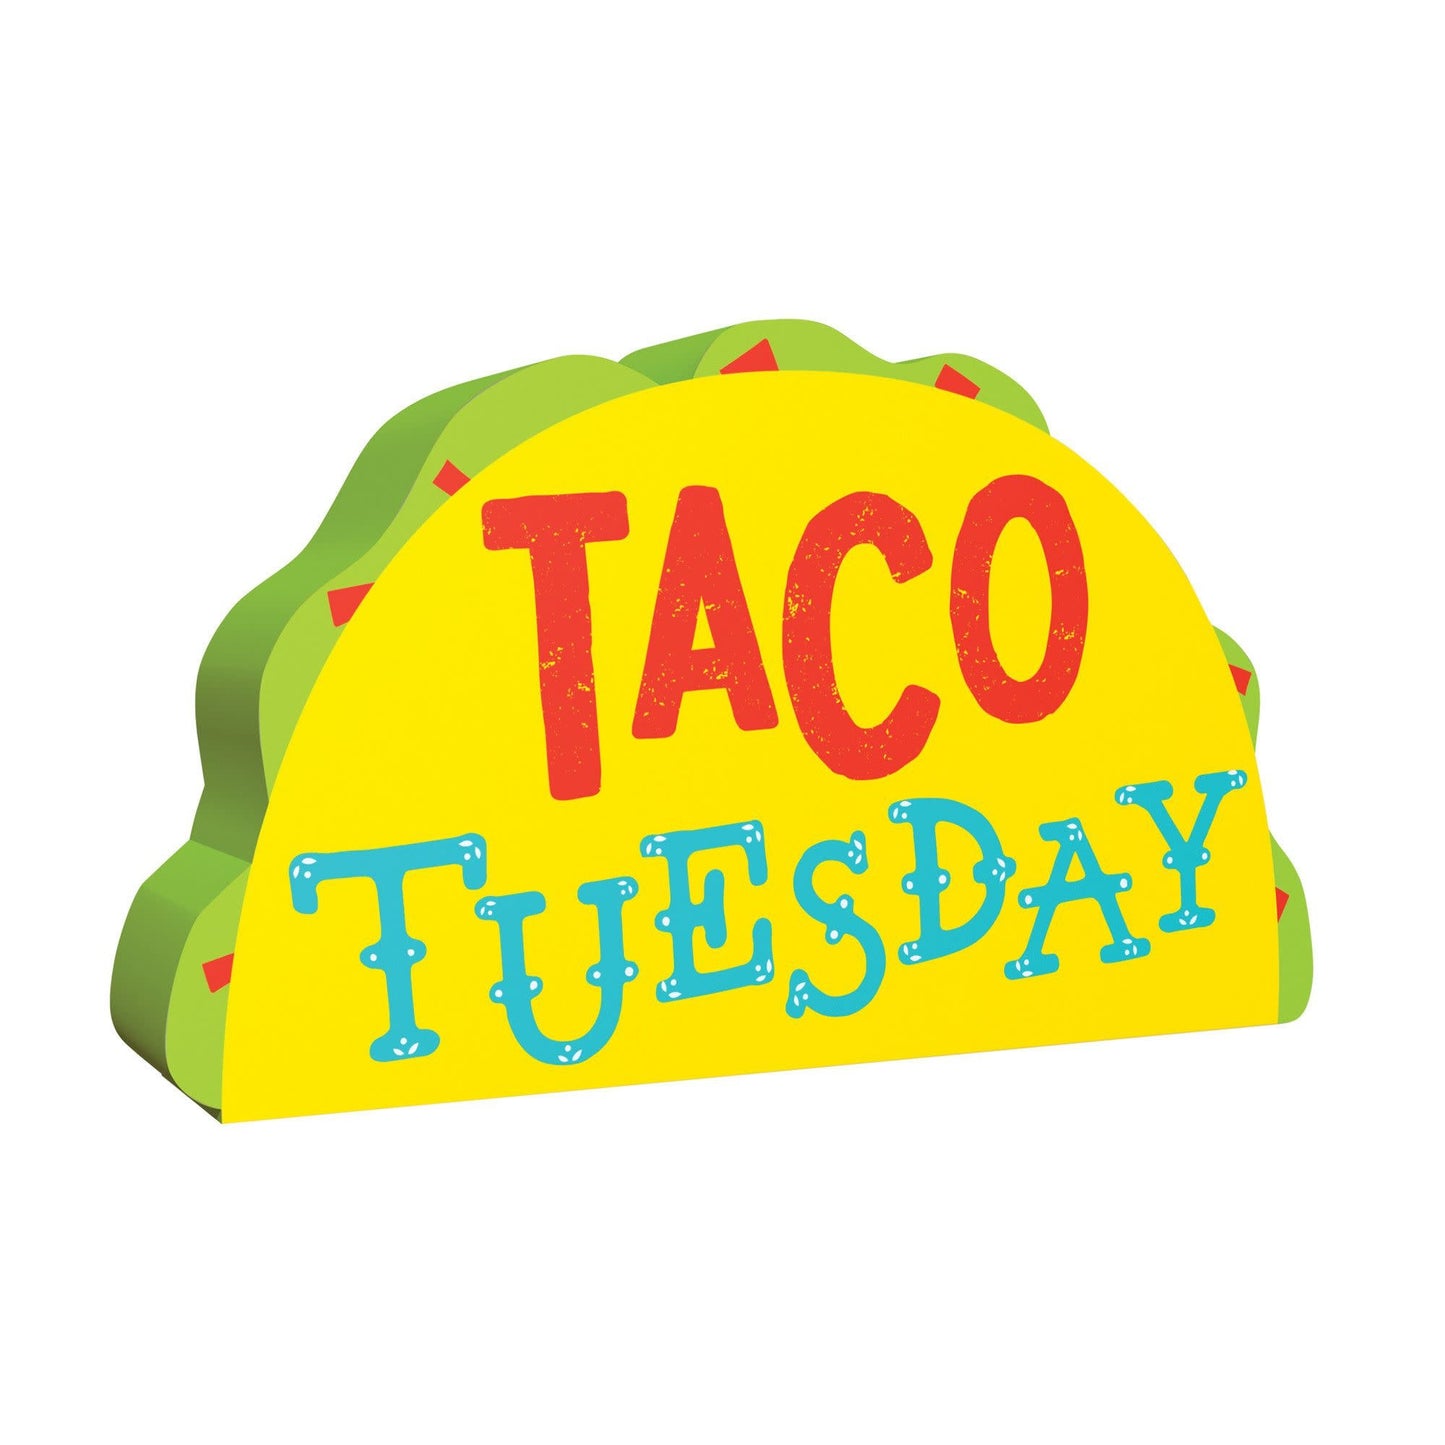 Mini Standing Sign: "Taco Tuesday"